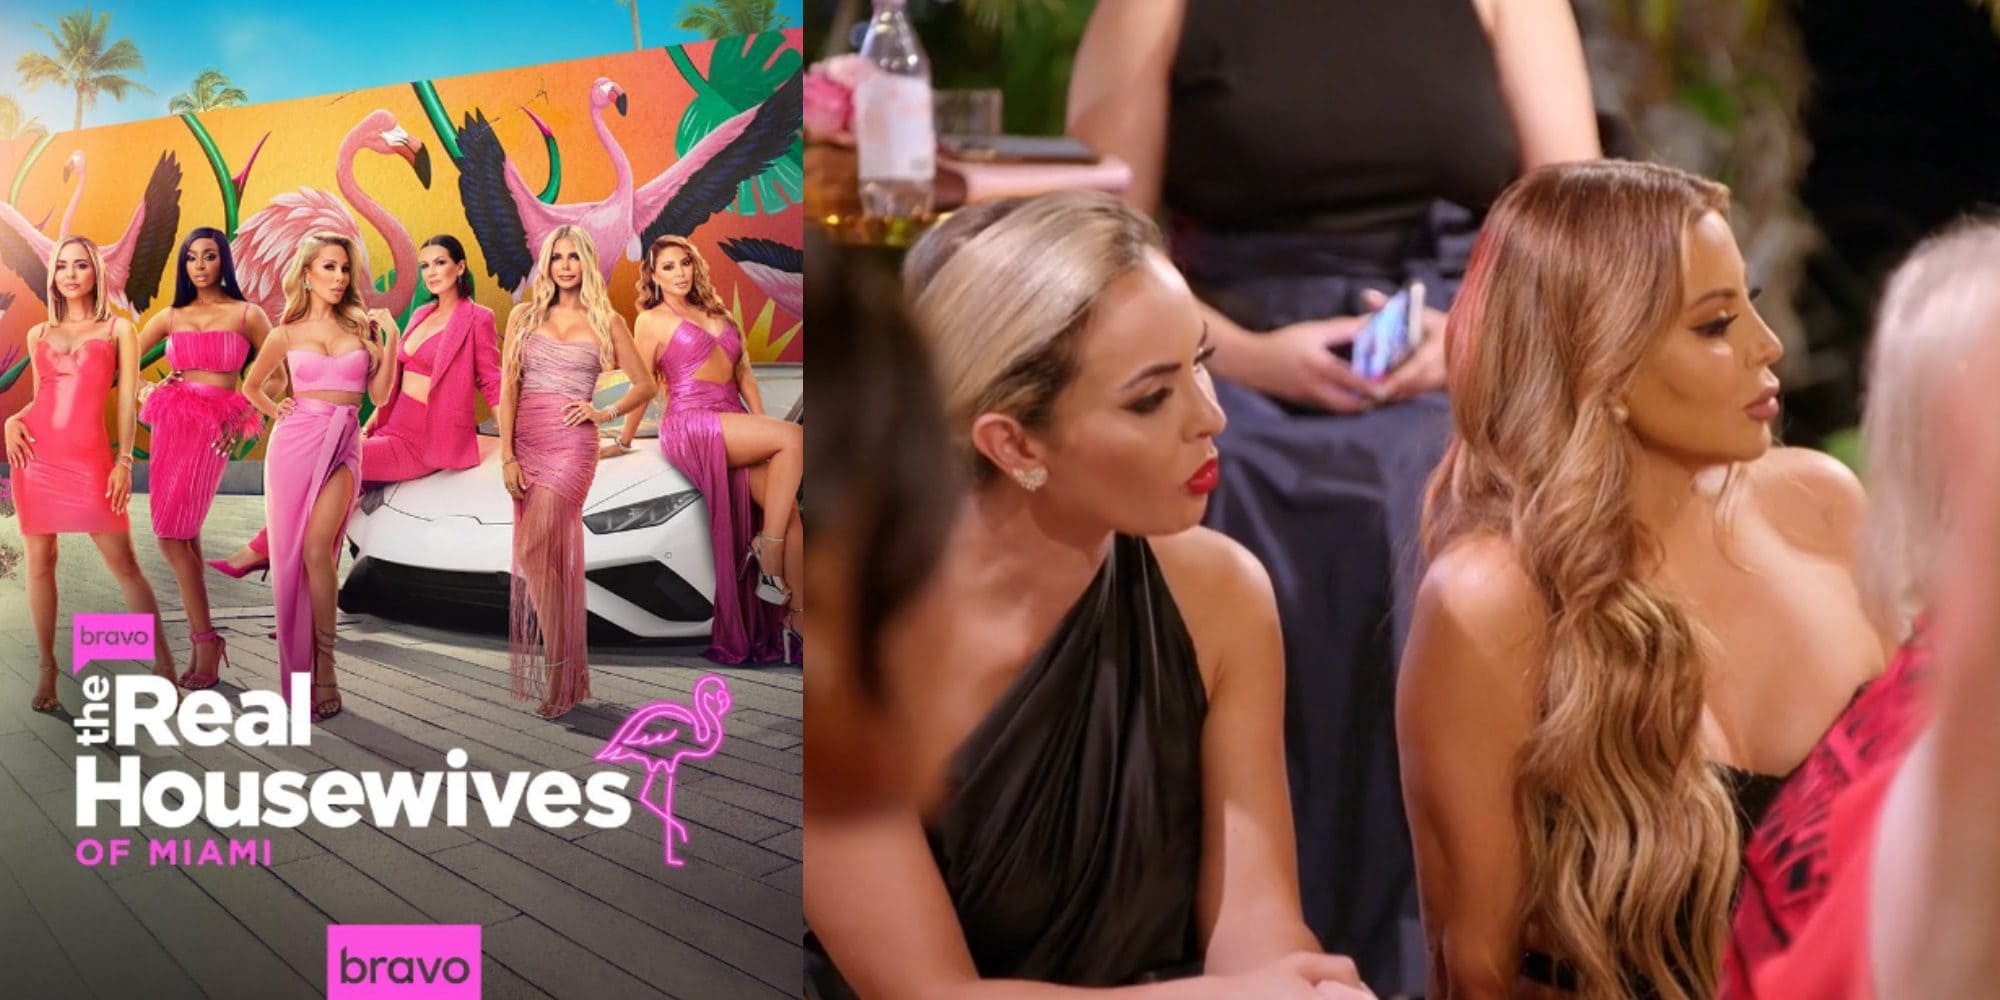 The Real Housewives of Miami Season 6 Episode 7: 'Palm Beach Chaos' Release Date, Spoilers & Recap